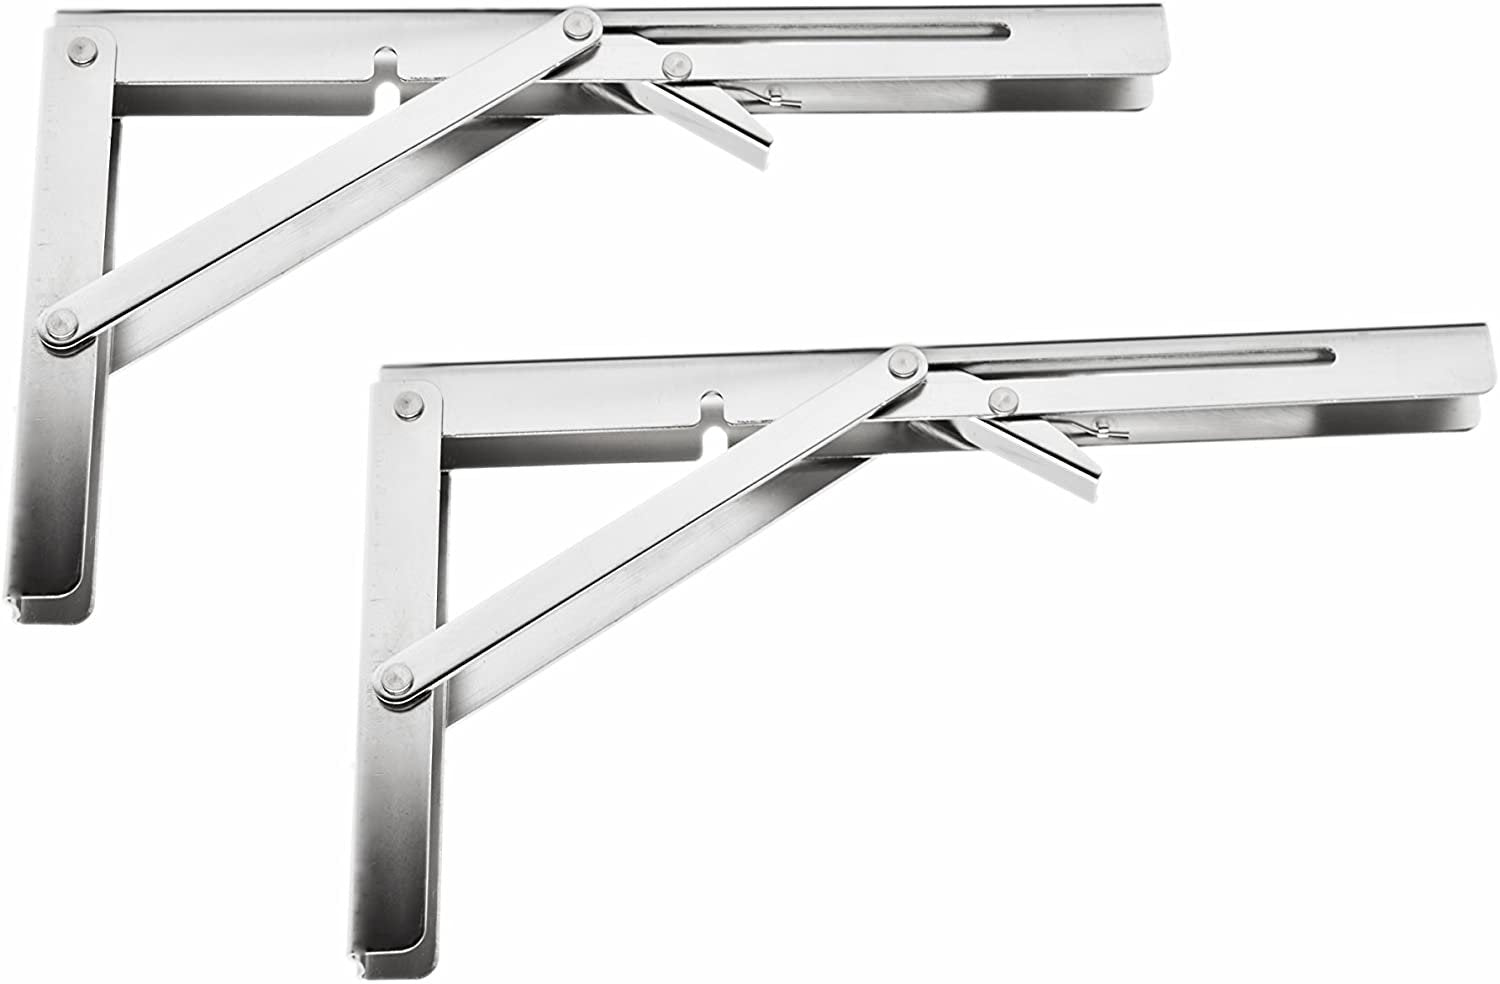 MARINE CITY Boat Stainless-Steel Table Bracket -Short Release Arm, 12”, 330LB